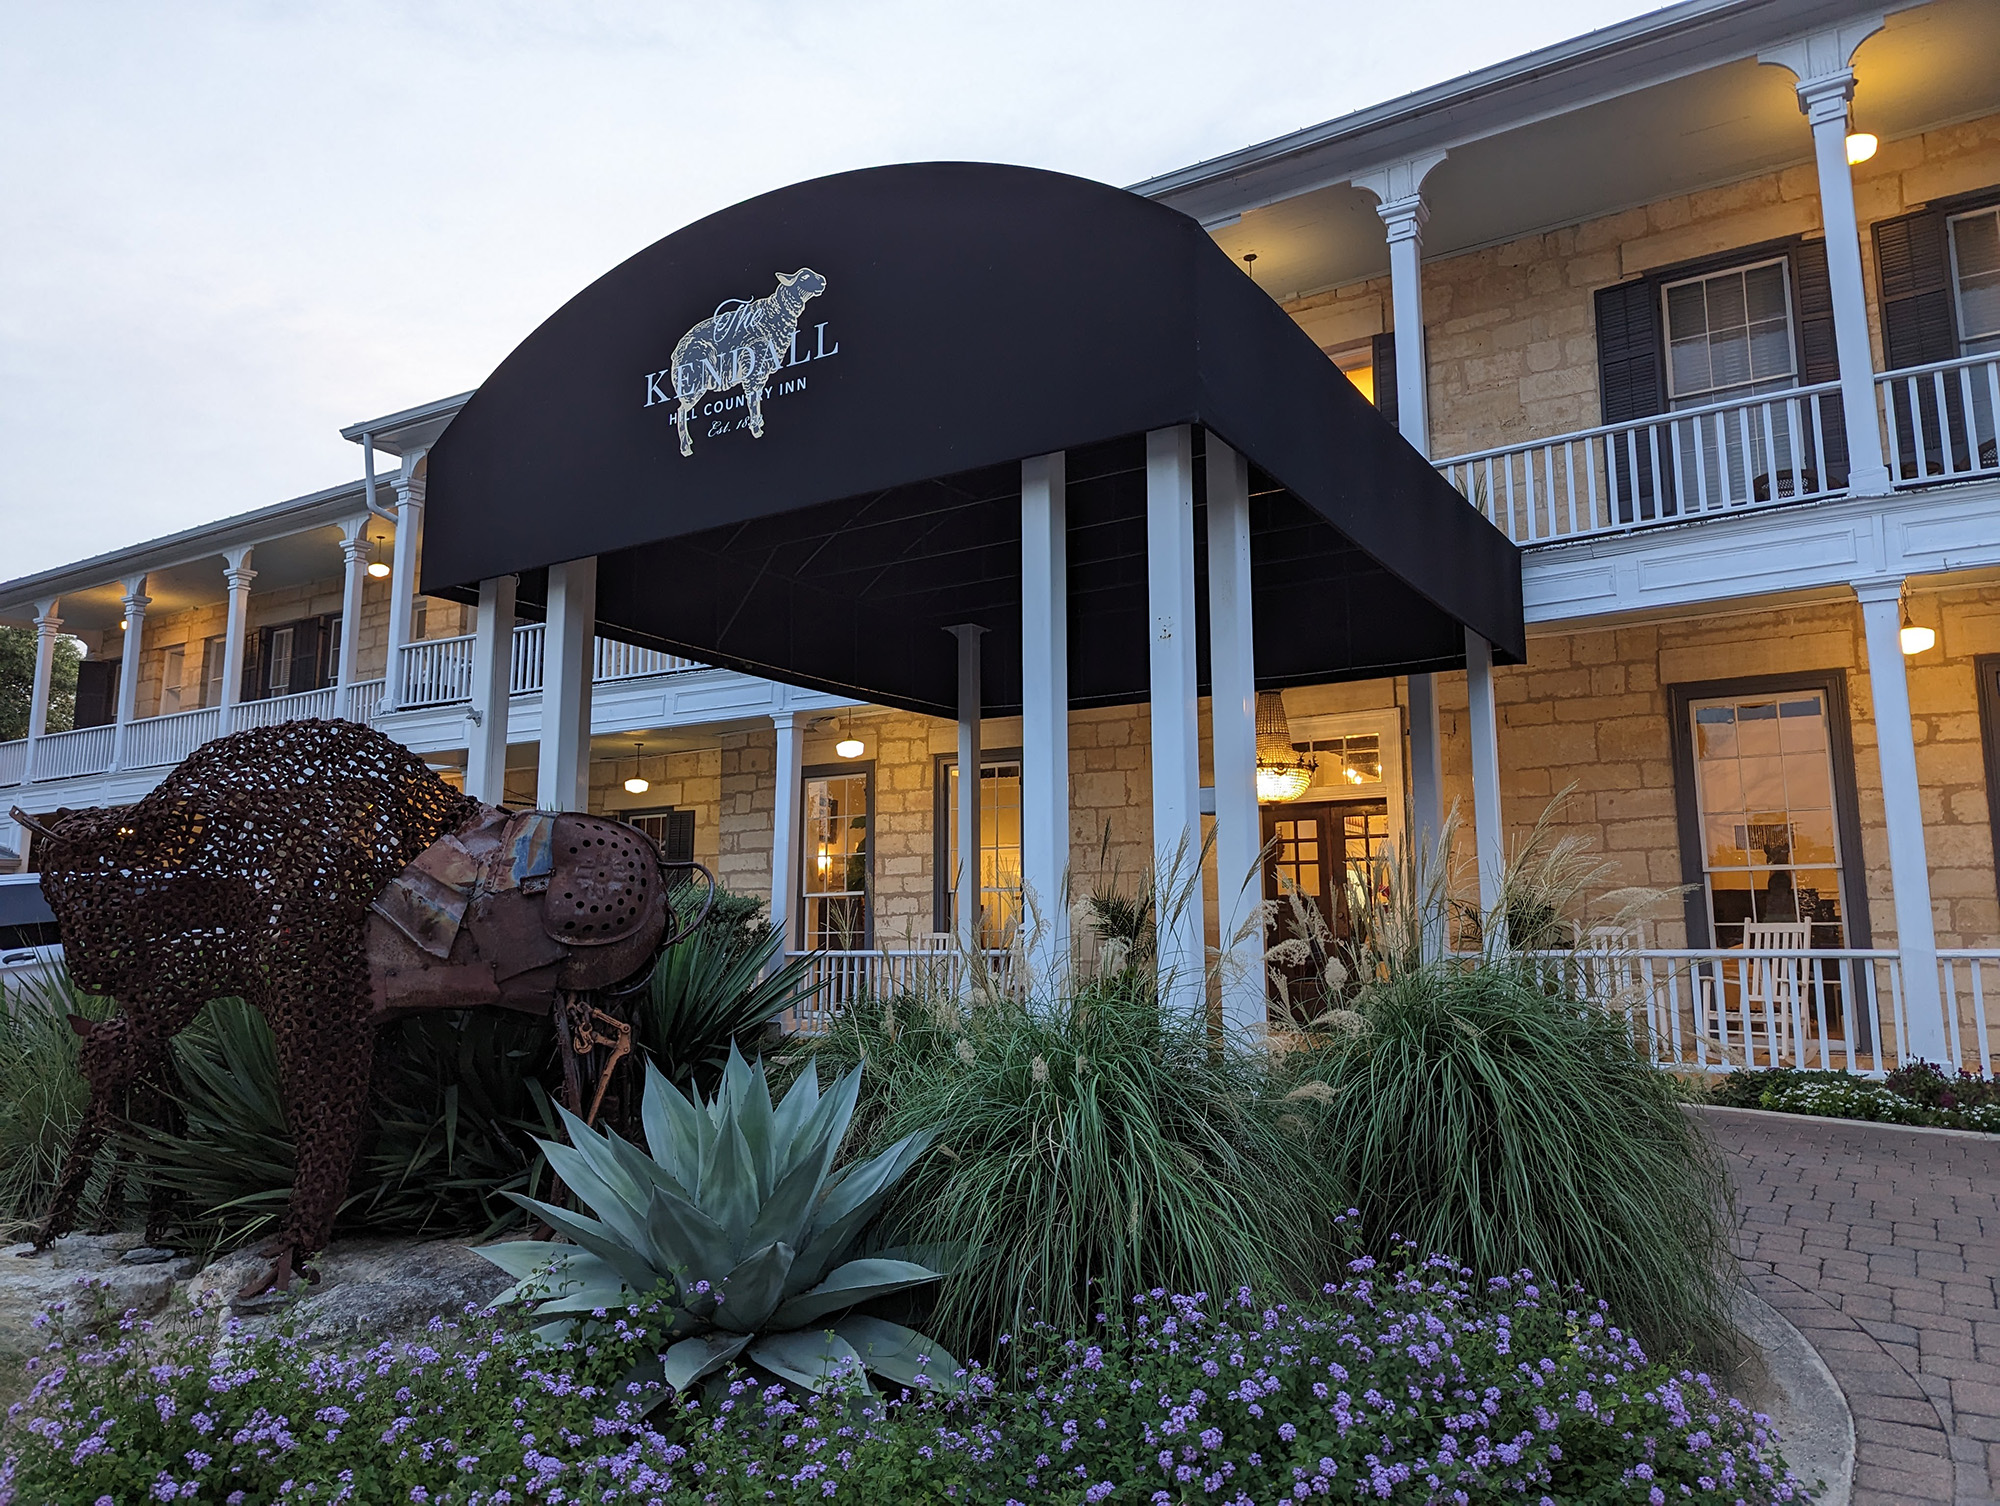 The front entrance to The Kendall, a hotel painted white with a black-and-white portico and a logo featuring a sheep with the words "The Kendall Hill Country Inn Est. 1859." A rusted metal statue of a buffalo is in front of the entrance.